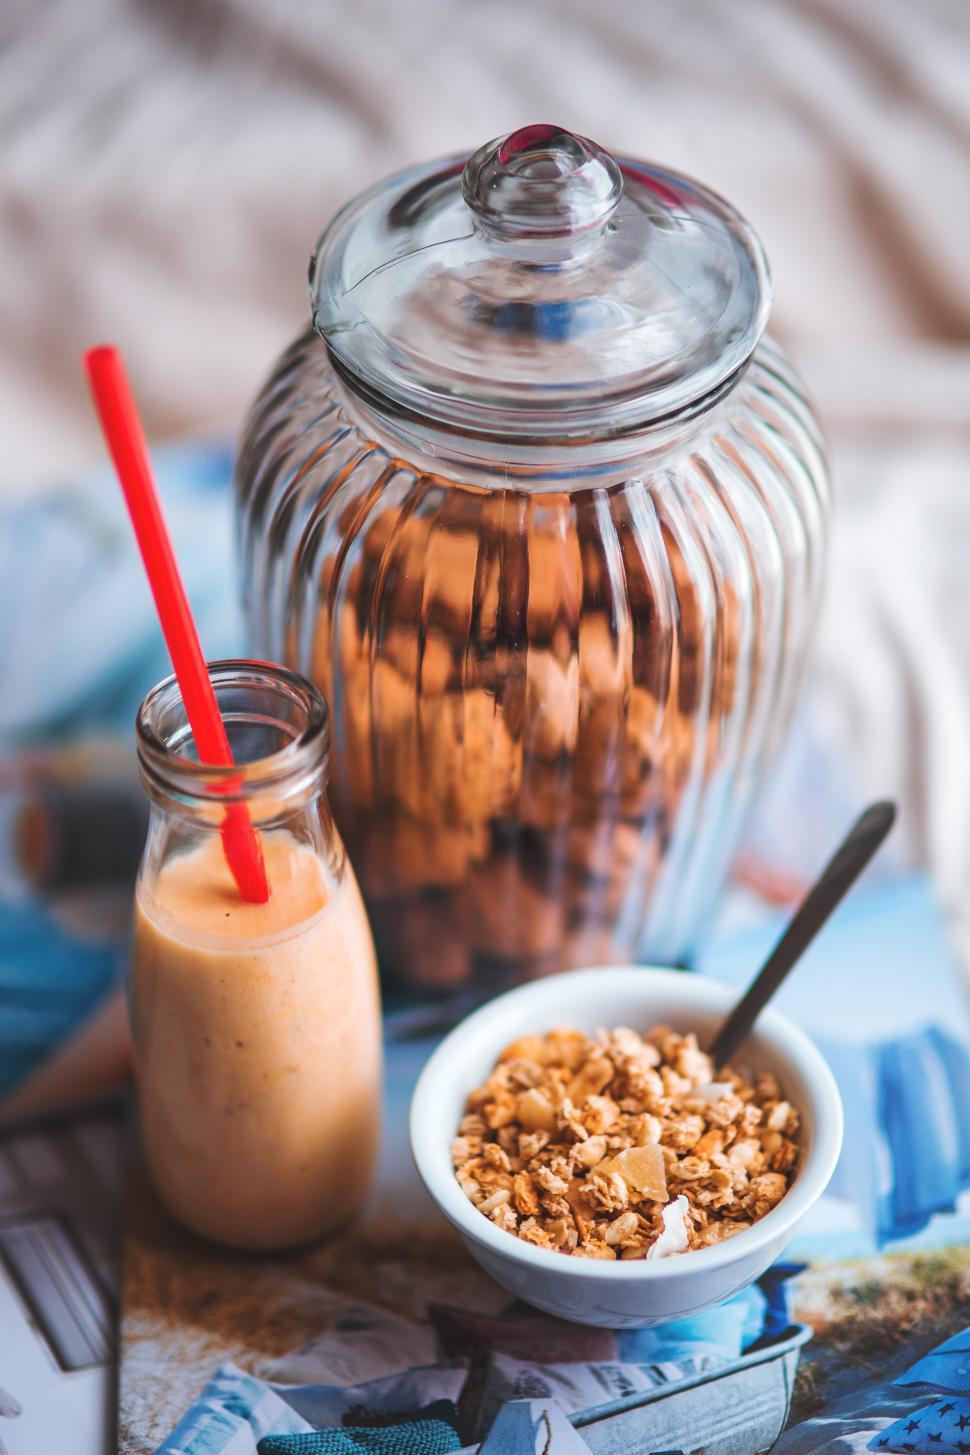 Free Image of Glass Jar Filled With Granola Next to a Bowl 